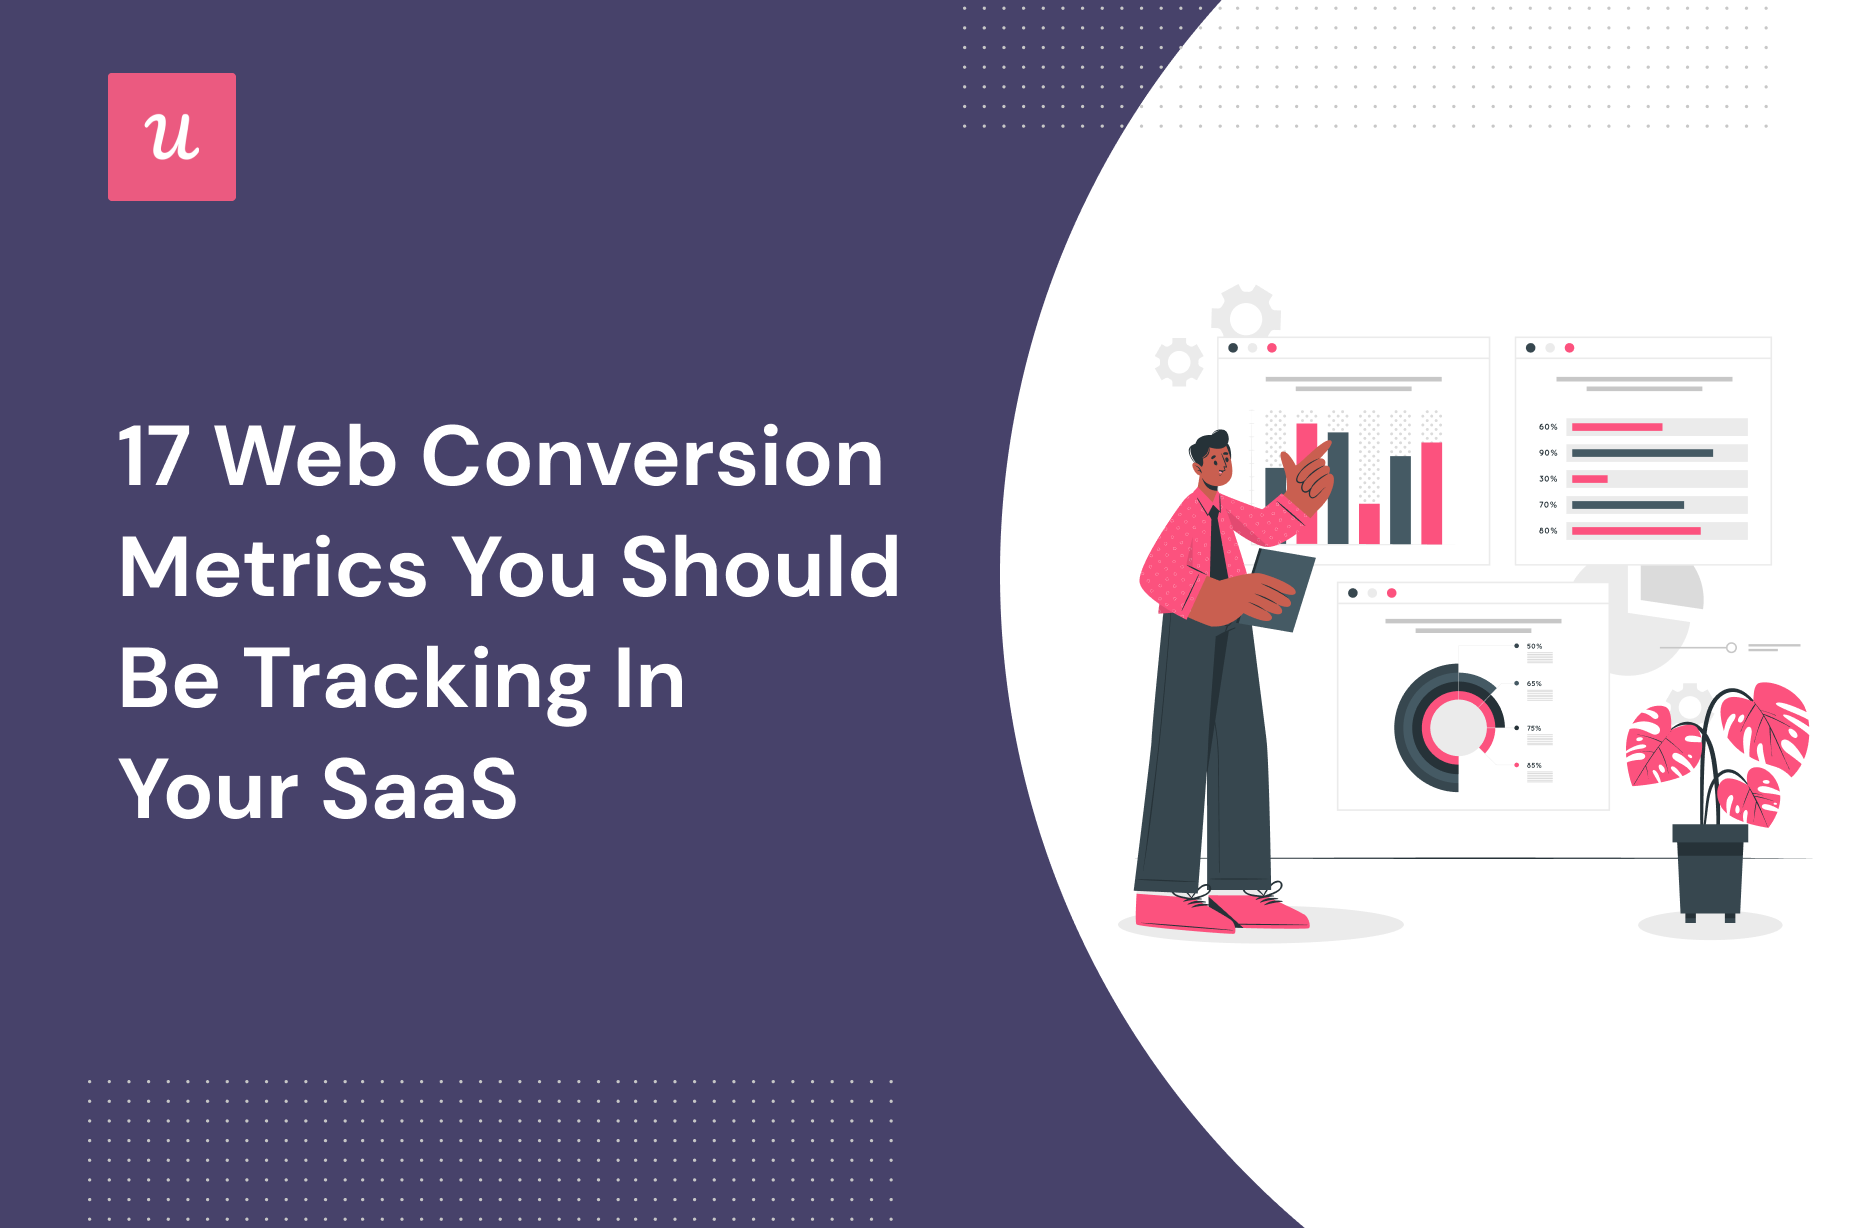 17 Web Conversion Metrics You Should be Tracking in Your SaaS